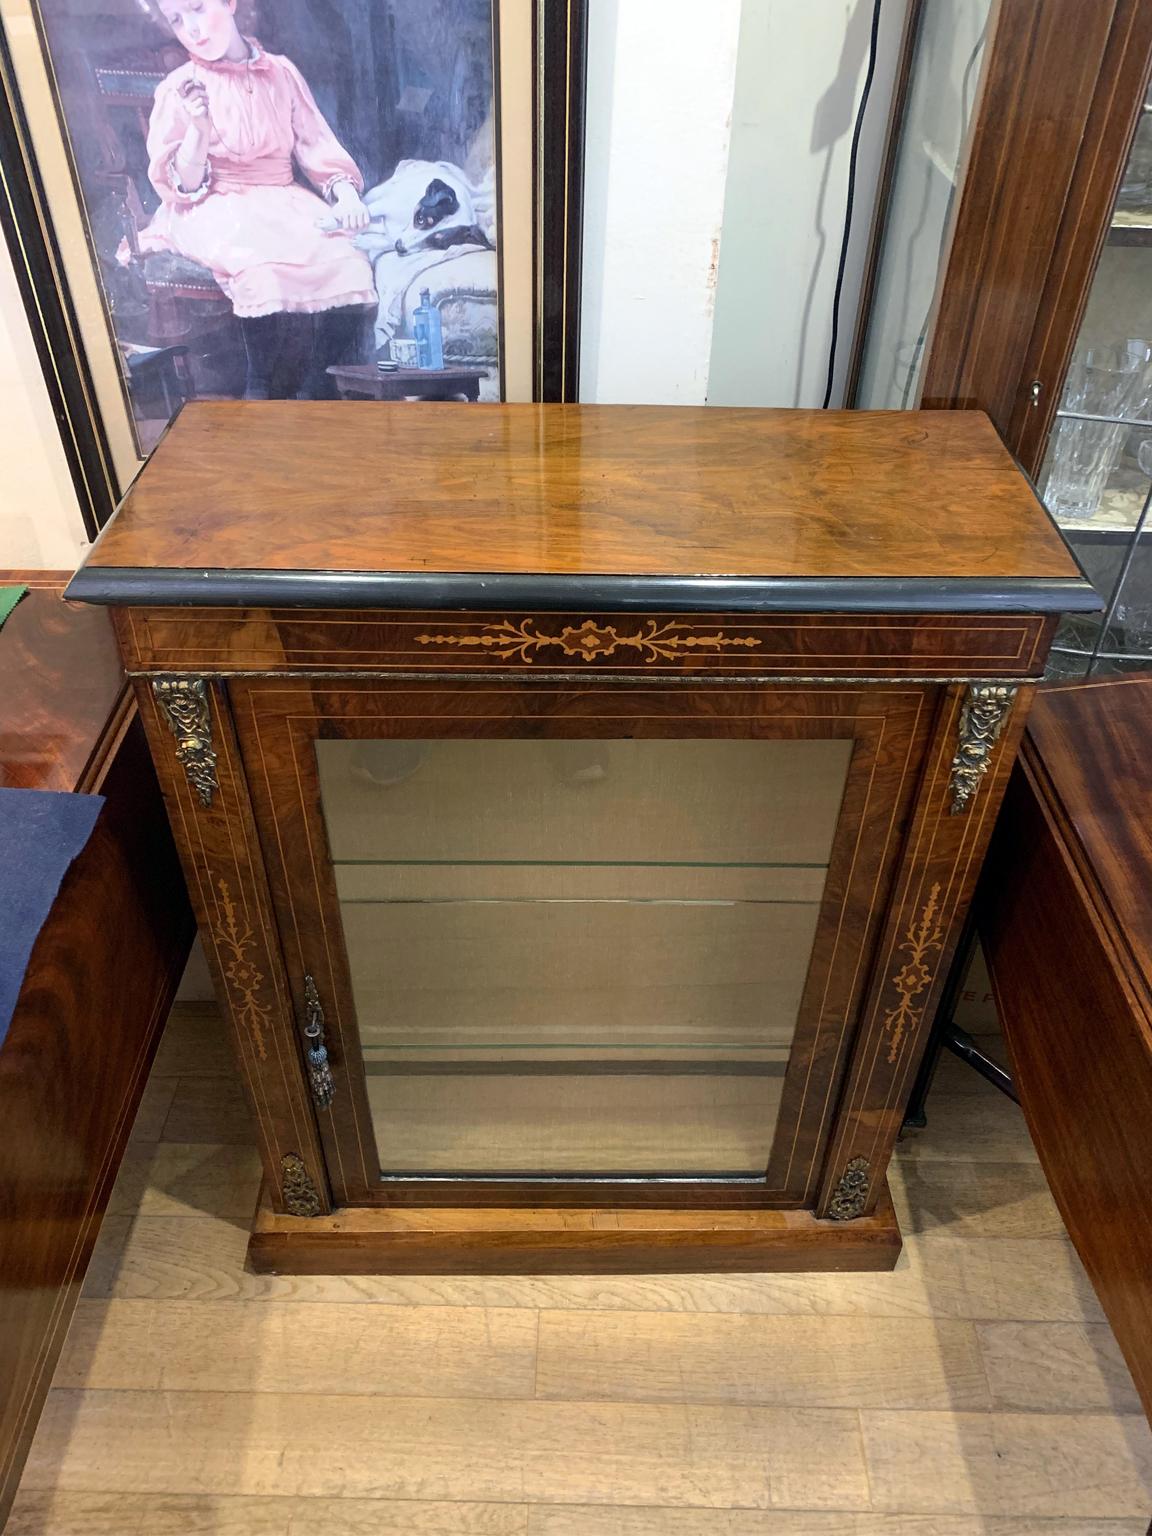 19th Century Victorian mahogany inlaid pier cabinet with three original glass shelves and working key.

